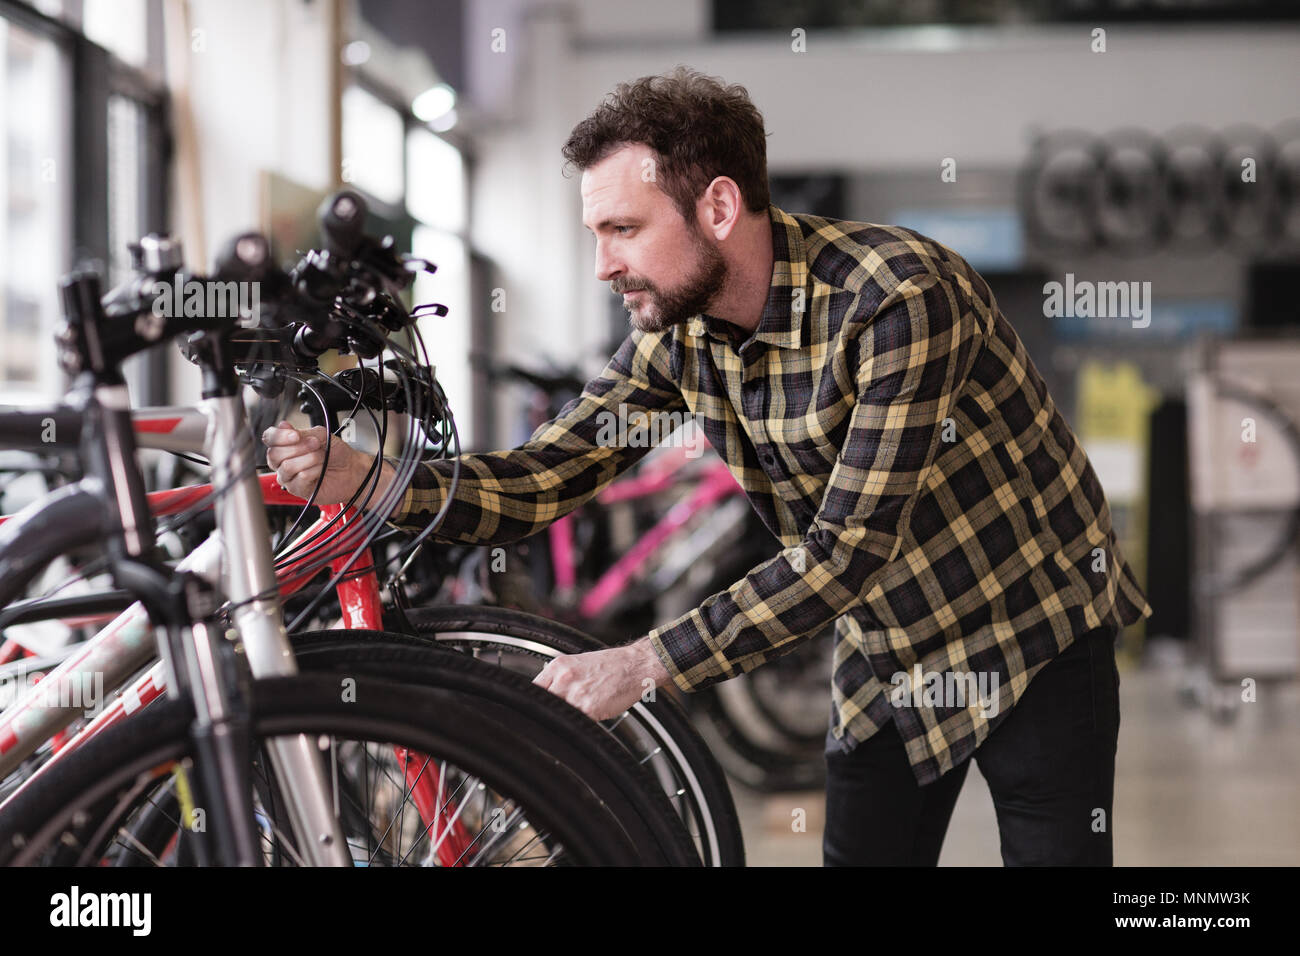 Adult male choosing a bike in a cycle store Stock Photo